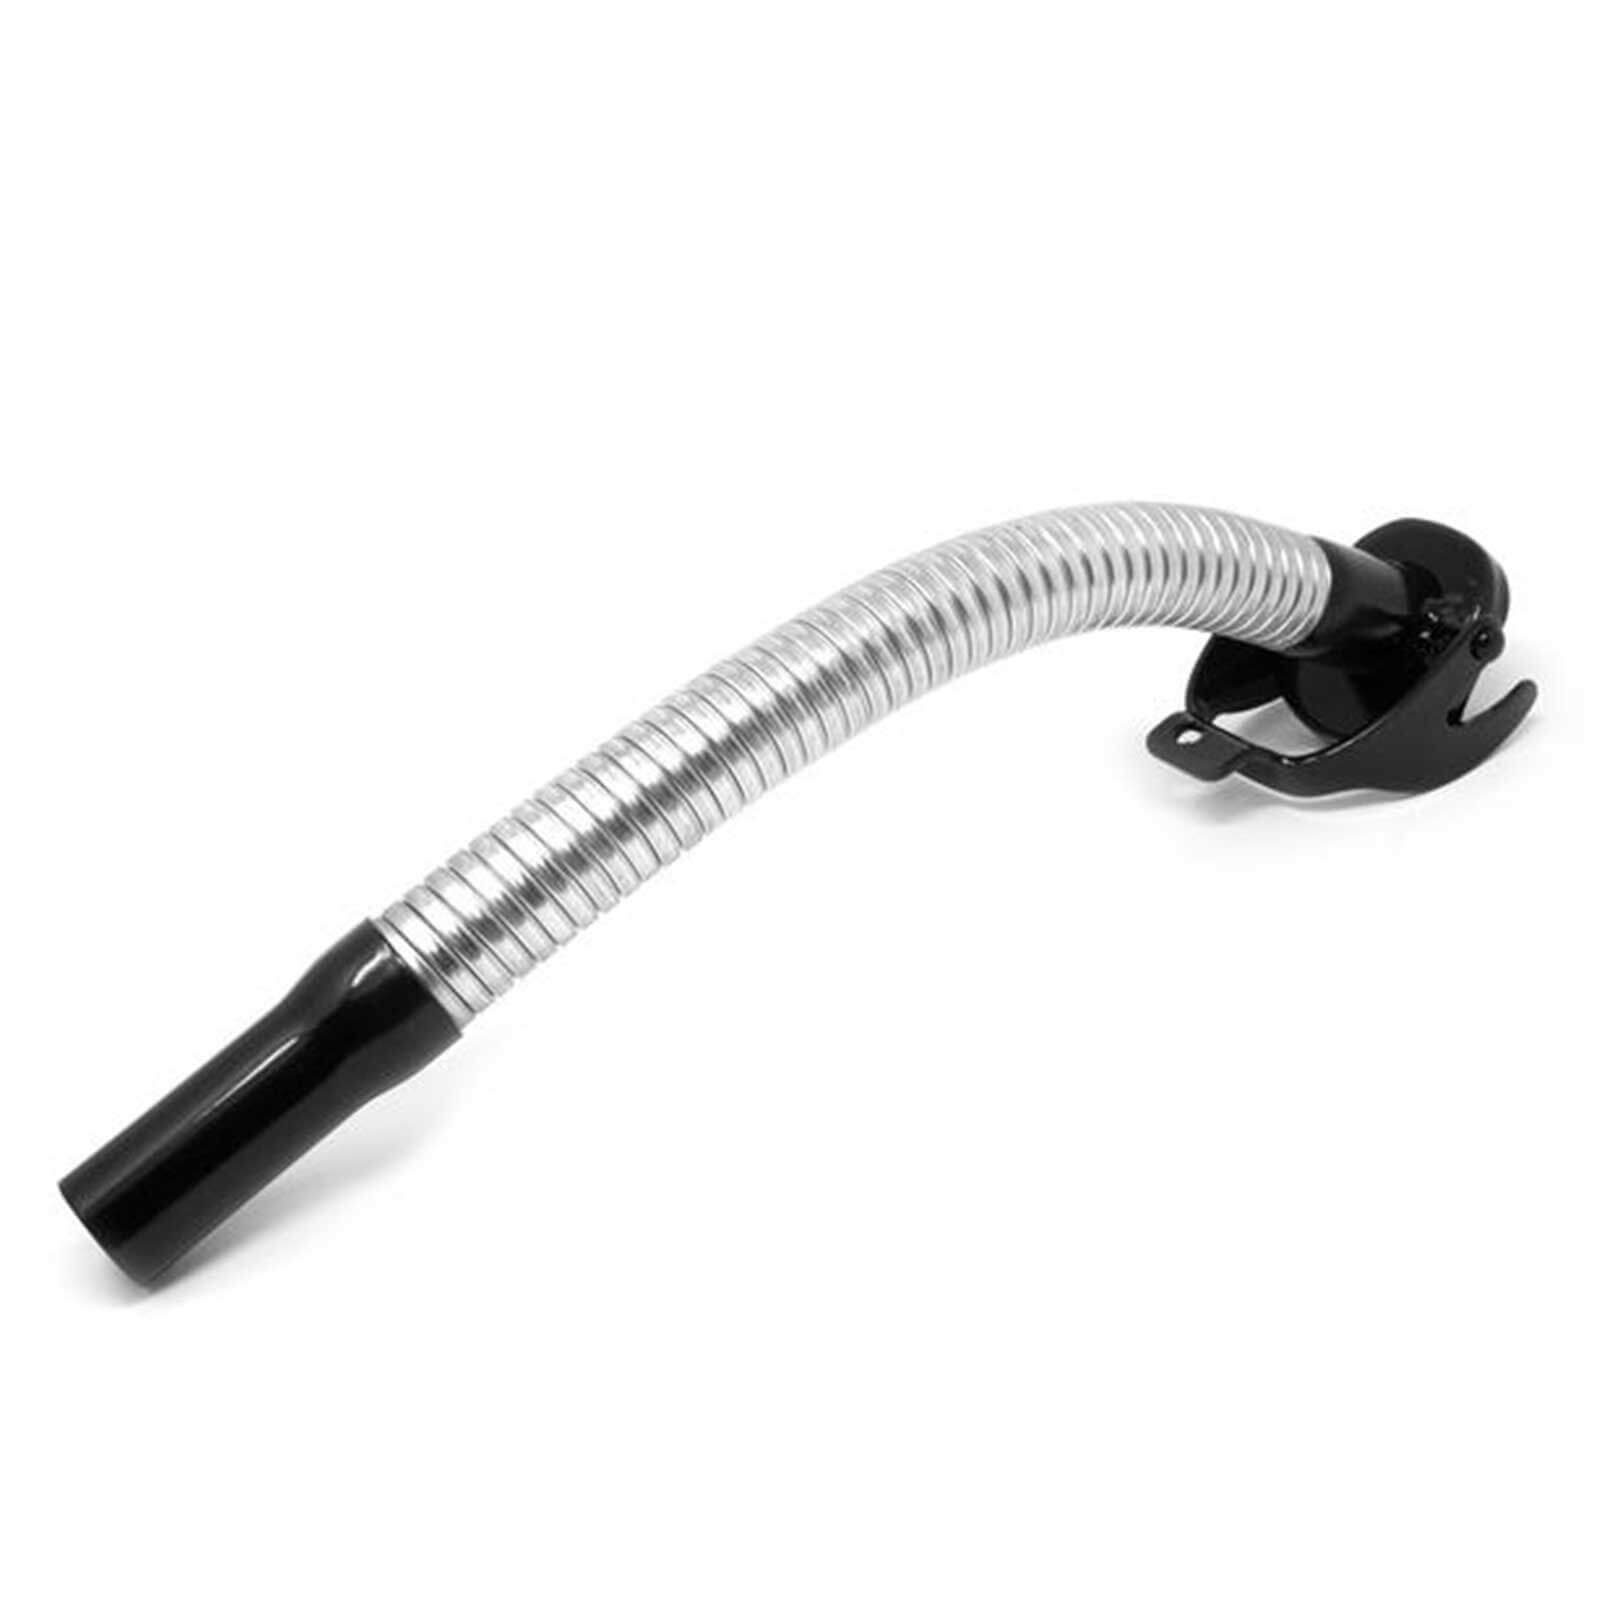 Sirius Flexible Long Pouring Spout for Jerry Cans Black